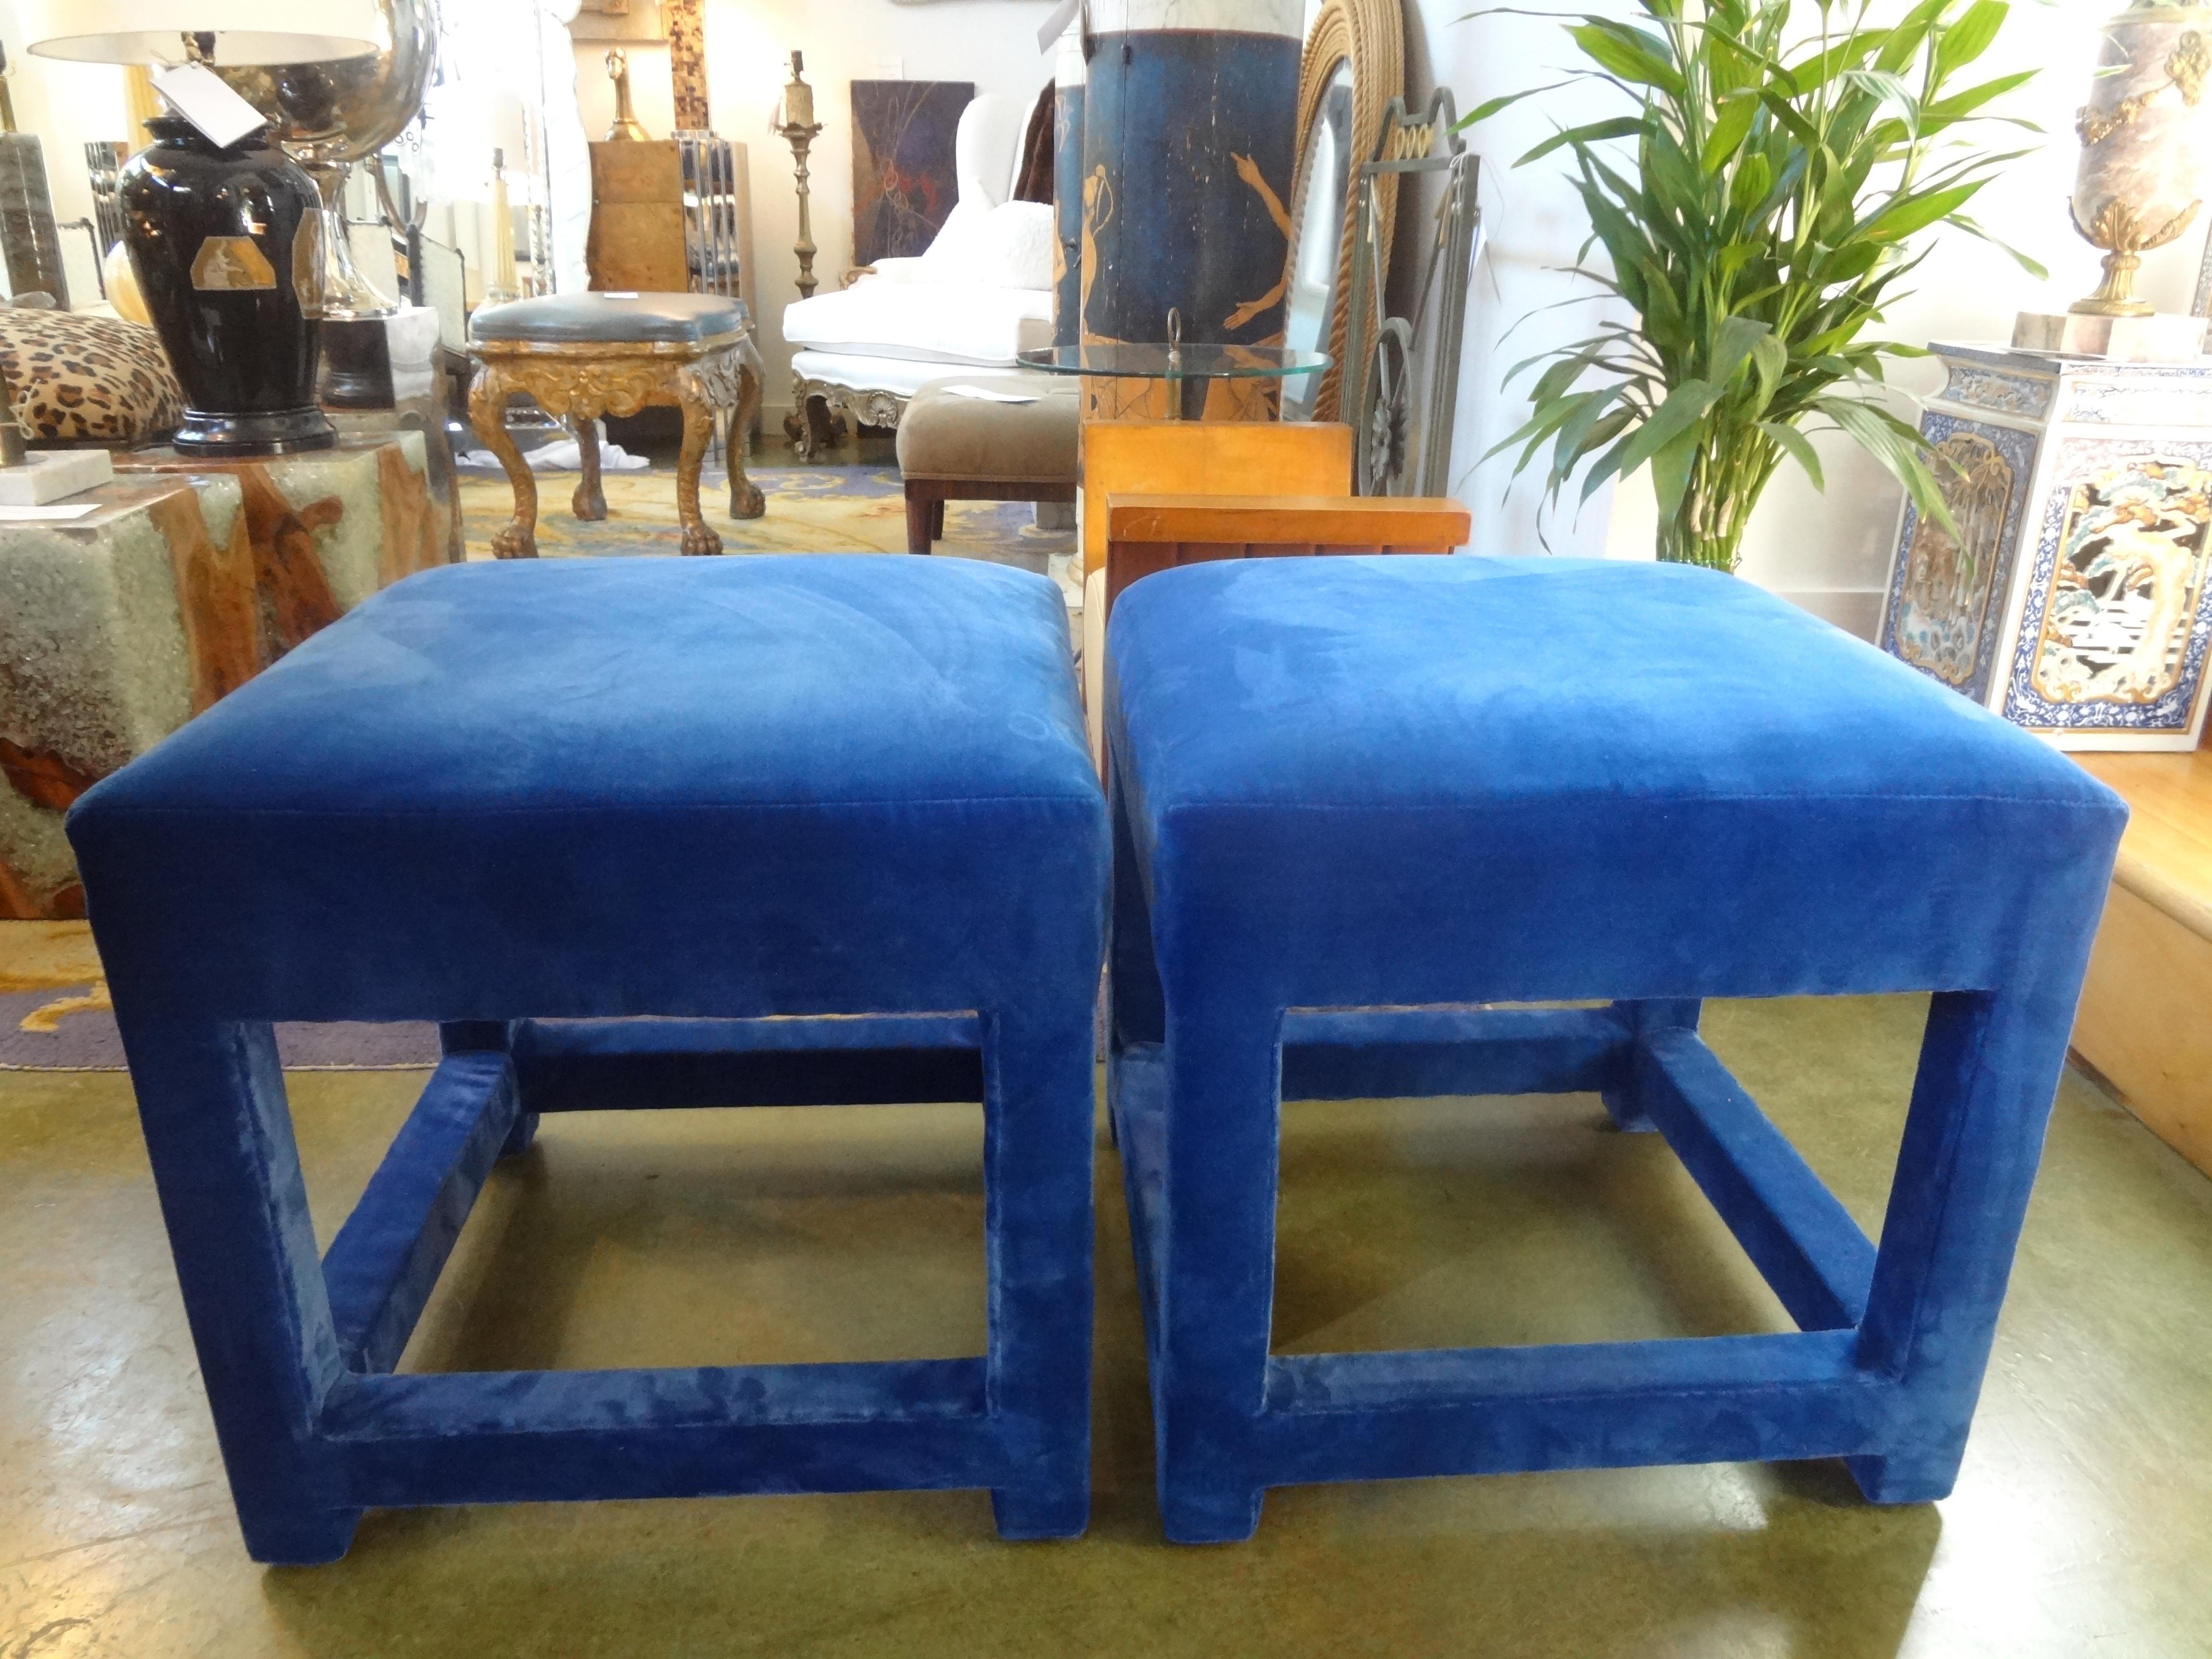 Great pair of Milo Baughman Parsons style ottomans or benches. These beautiful Mid-Century Modern Parsons stools are square and a great size: 18.5